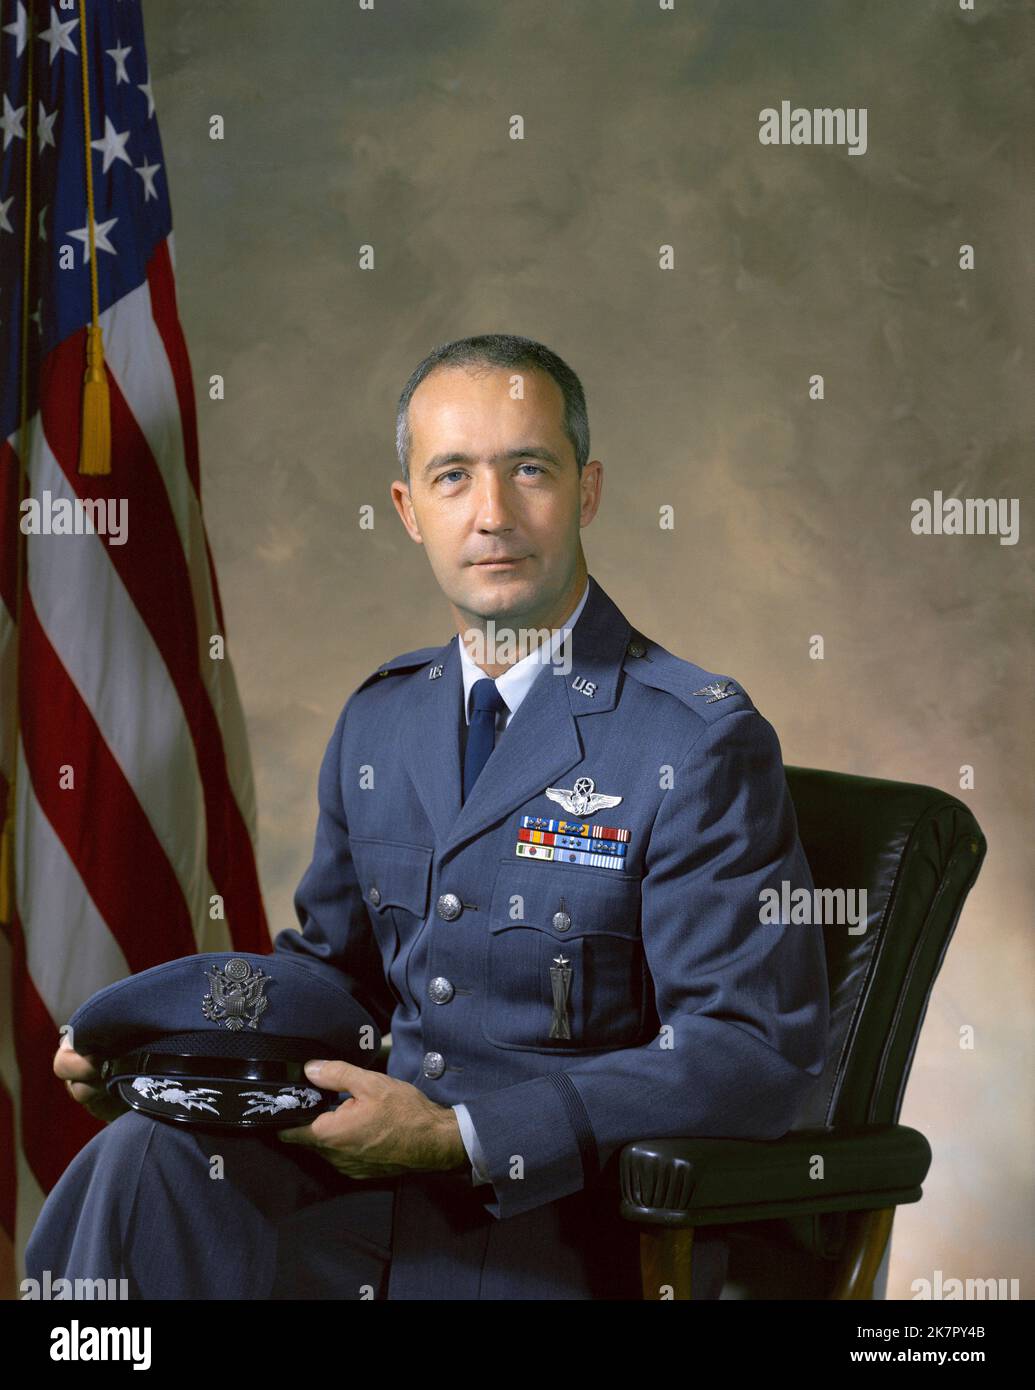 Houston, United States. 18th Oct, 2022. NASA studio portrait of astronaut James A. McDivitt, in his Air Force uniform at the Manned Spacecraft Center, December 1, 1968 in Houston, Texas. McDivitt commanded the first spacewalk mission and took part in the first crewed orbital flight of a the lunar module, during Apollo 9 died October 15, 2022 at age 93. Credit: NASA/NASA/Alamy Live News Stock Photo